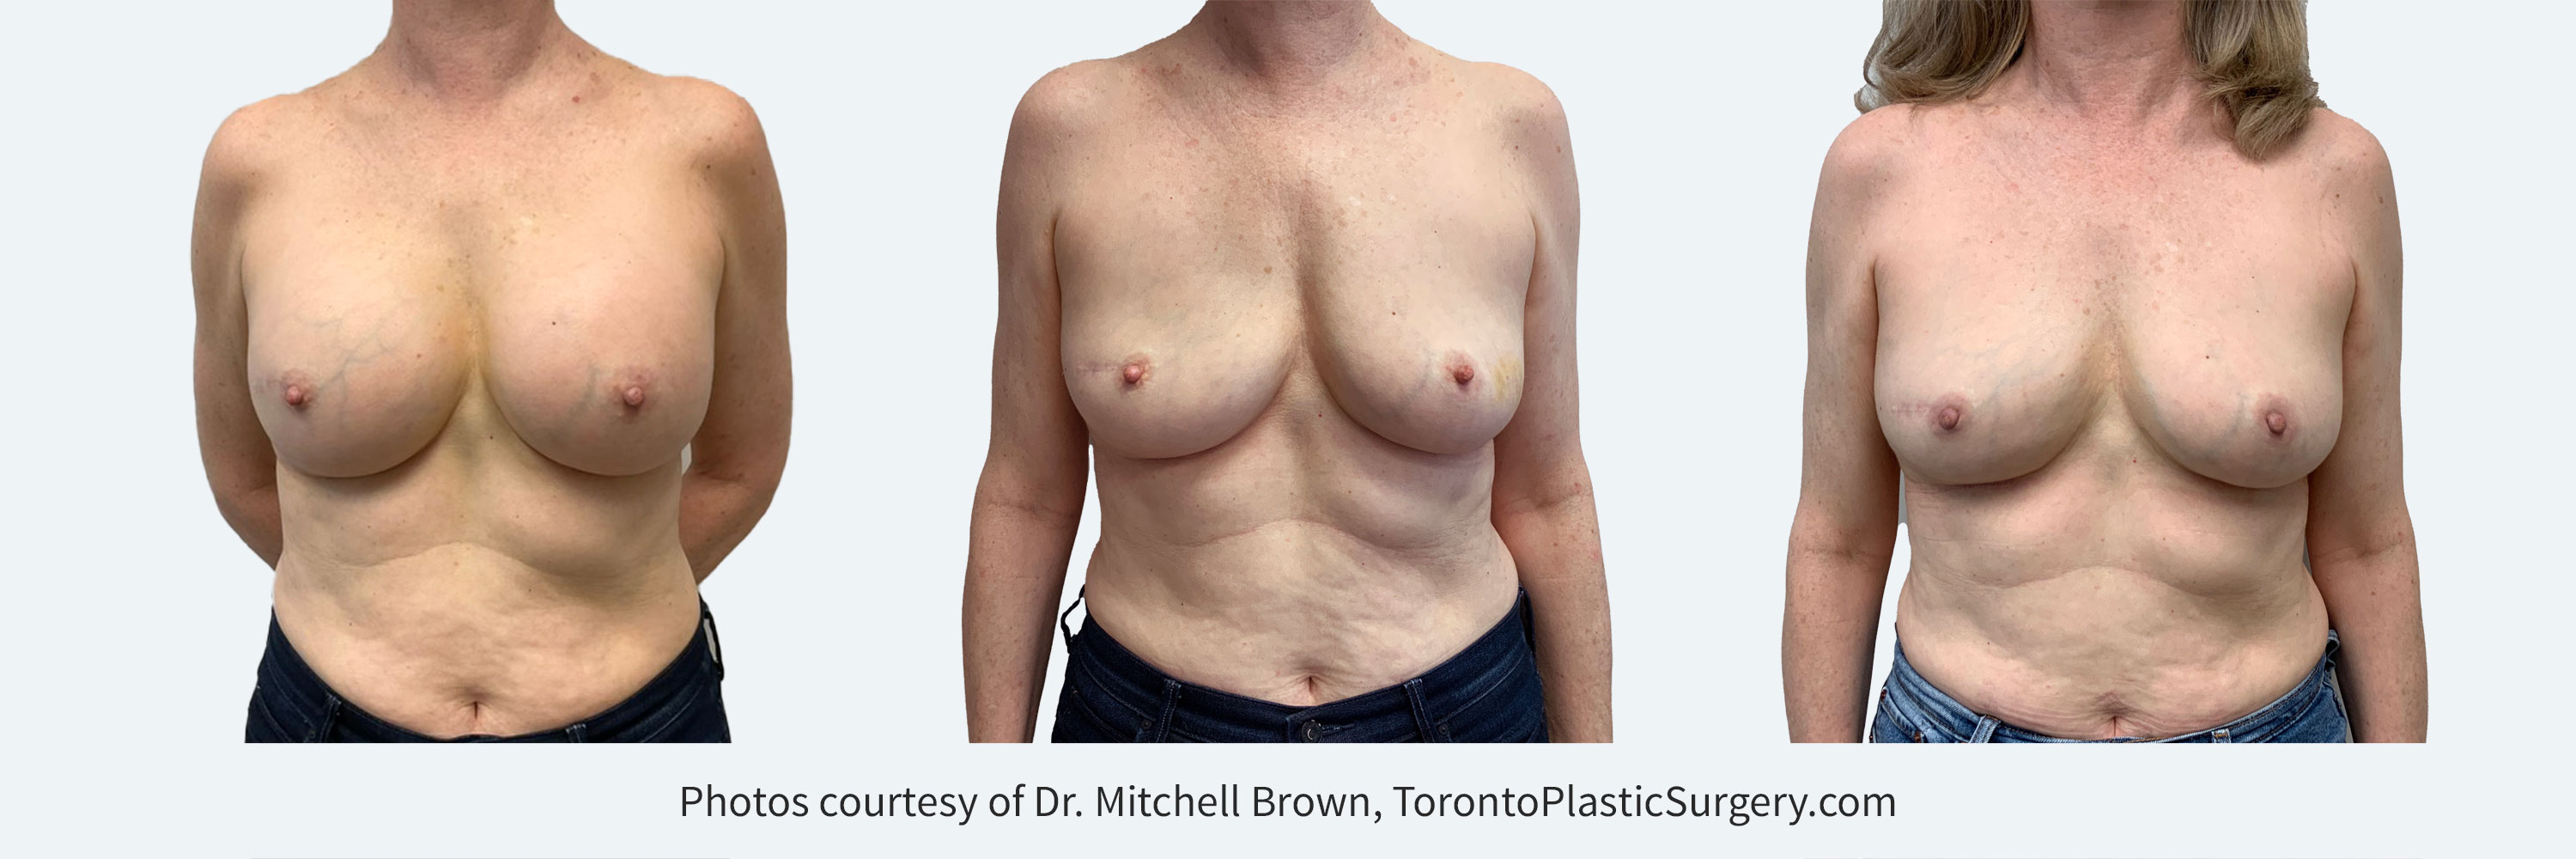 Transition-Related Breast Surgery – Toronto Plastic Surgery